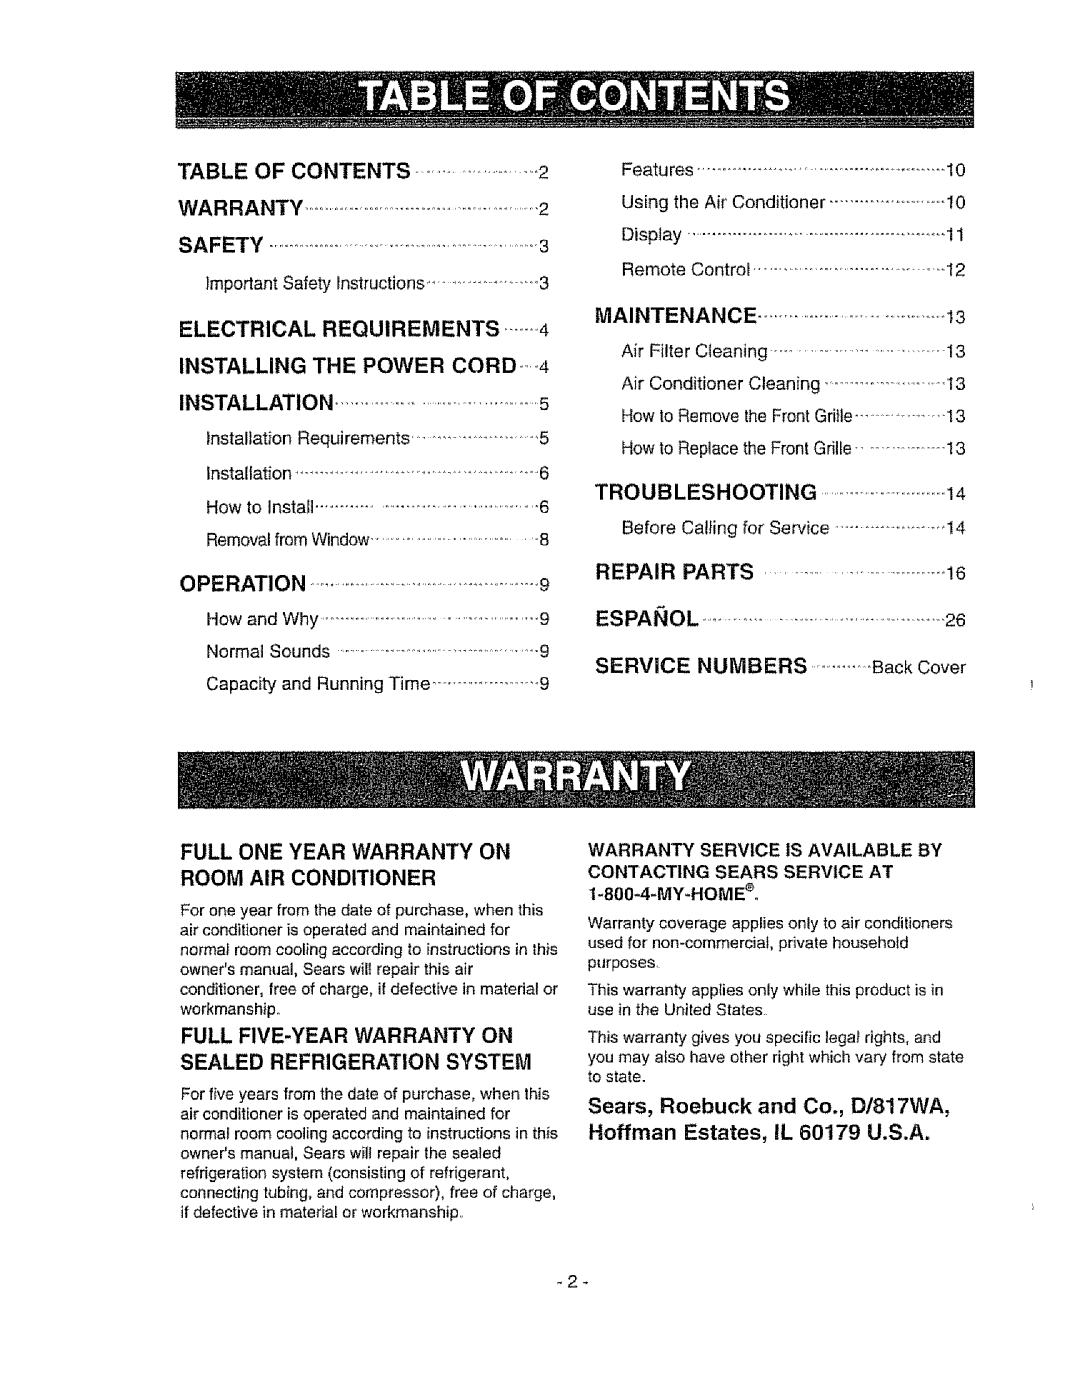 Kenmore 580. 72089 Full Five-Yearwarranty On, Sealed Refrigeration System, Table Of Contents, Safety, Electrical, Room 